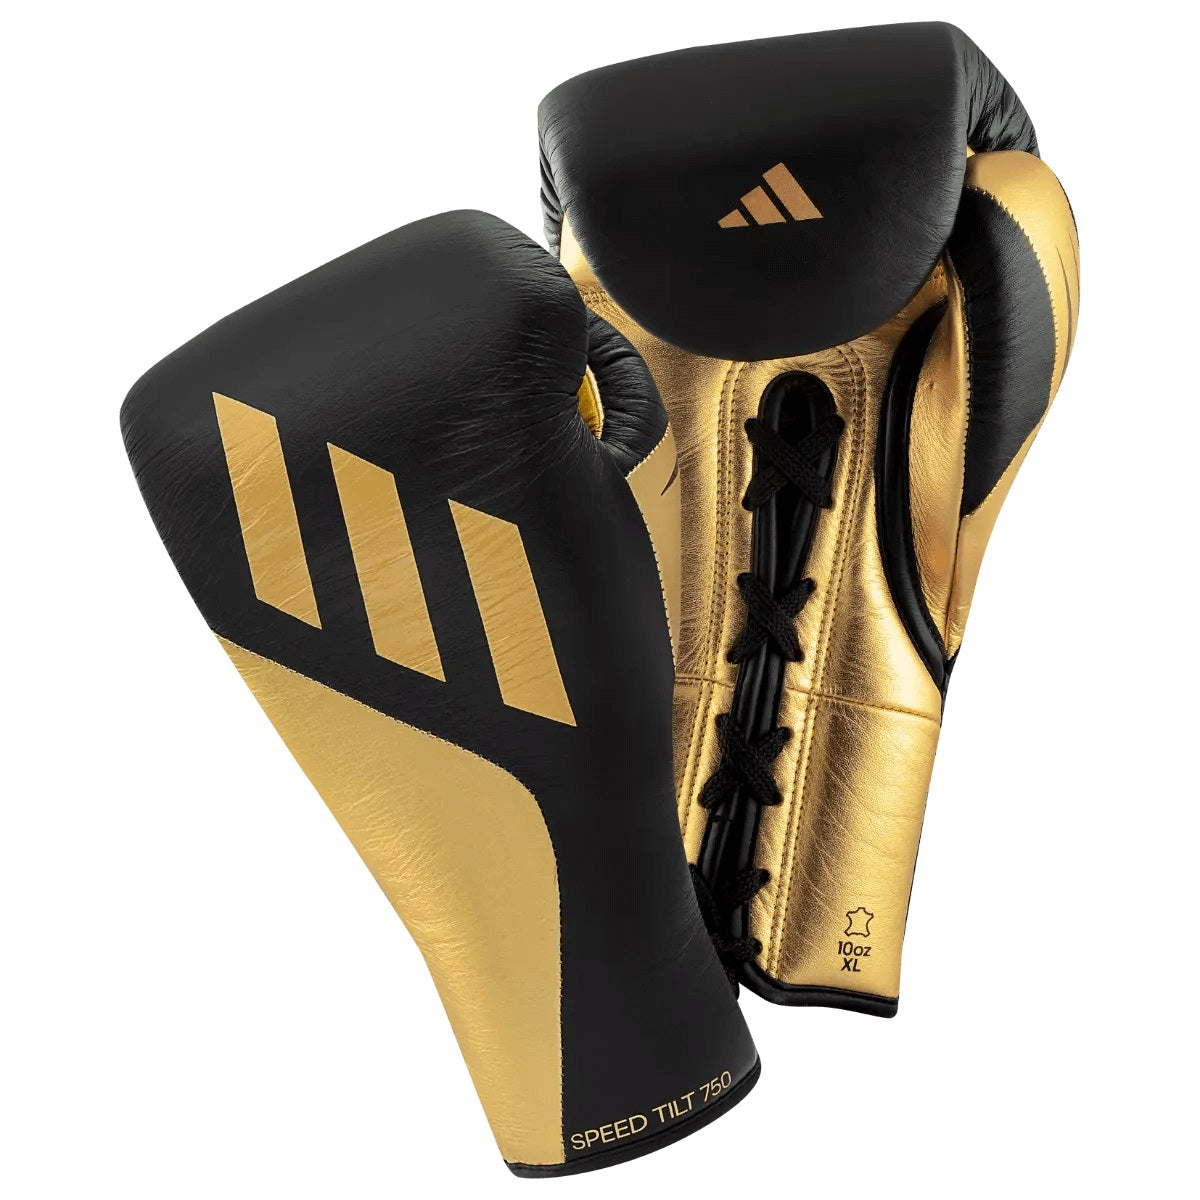 adidas Speed Tilt 750 Pro Lace Boxing Gloves BBBC